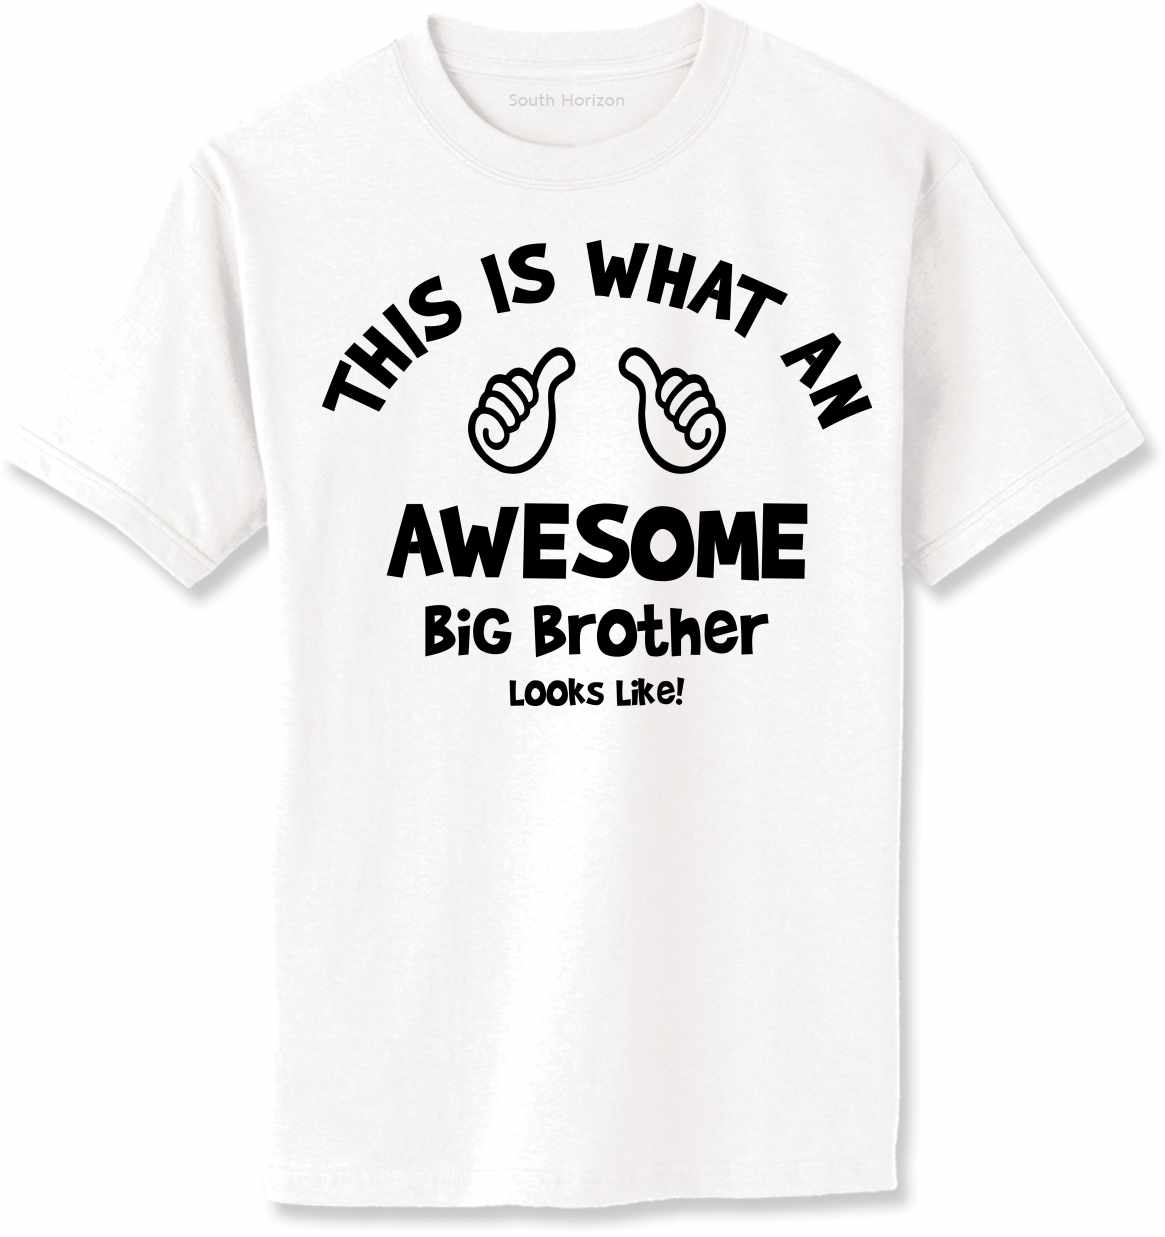 This is What an AWESOME BIG BROTHER Looks Like Adult T-Shirt (#964-1)